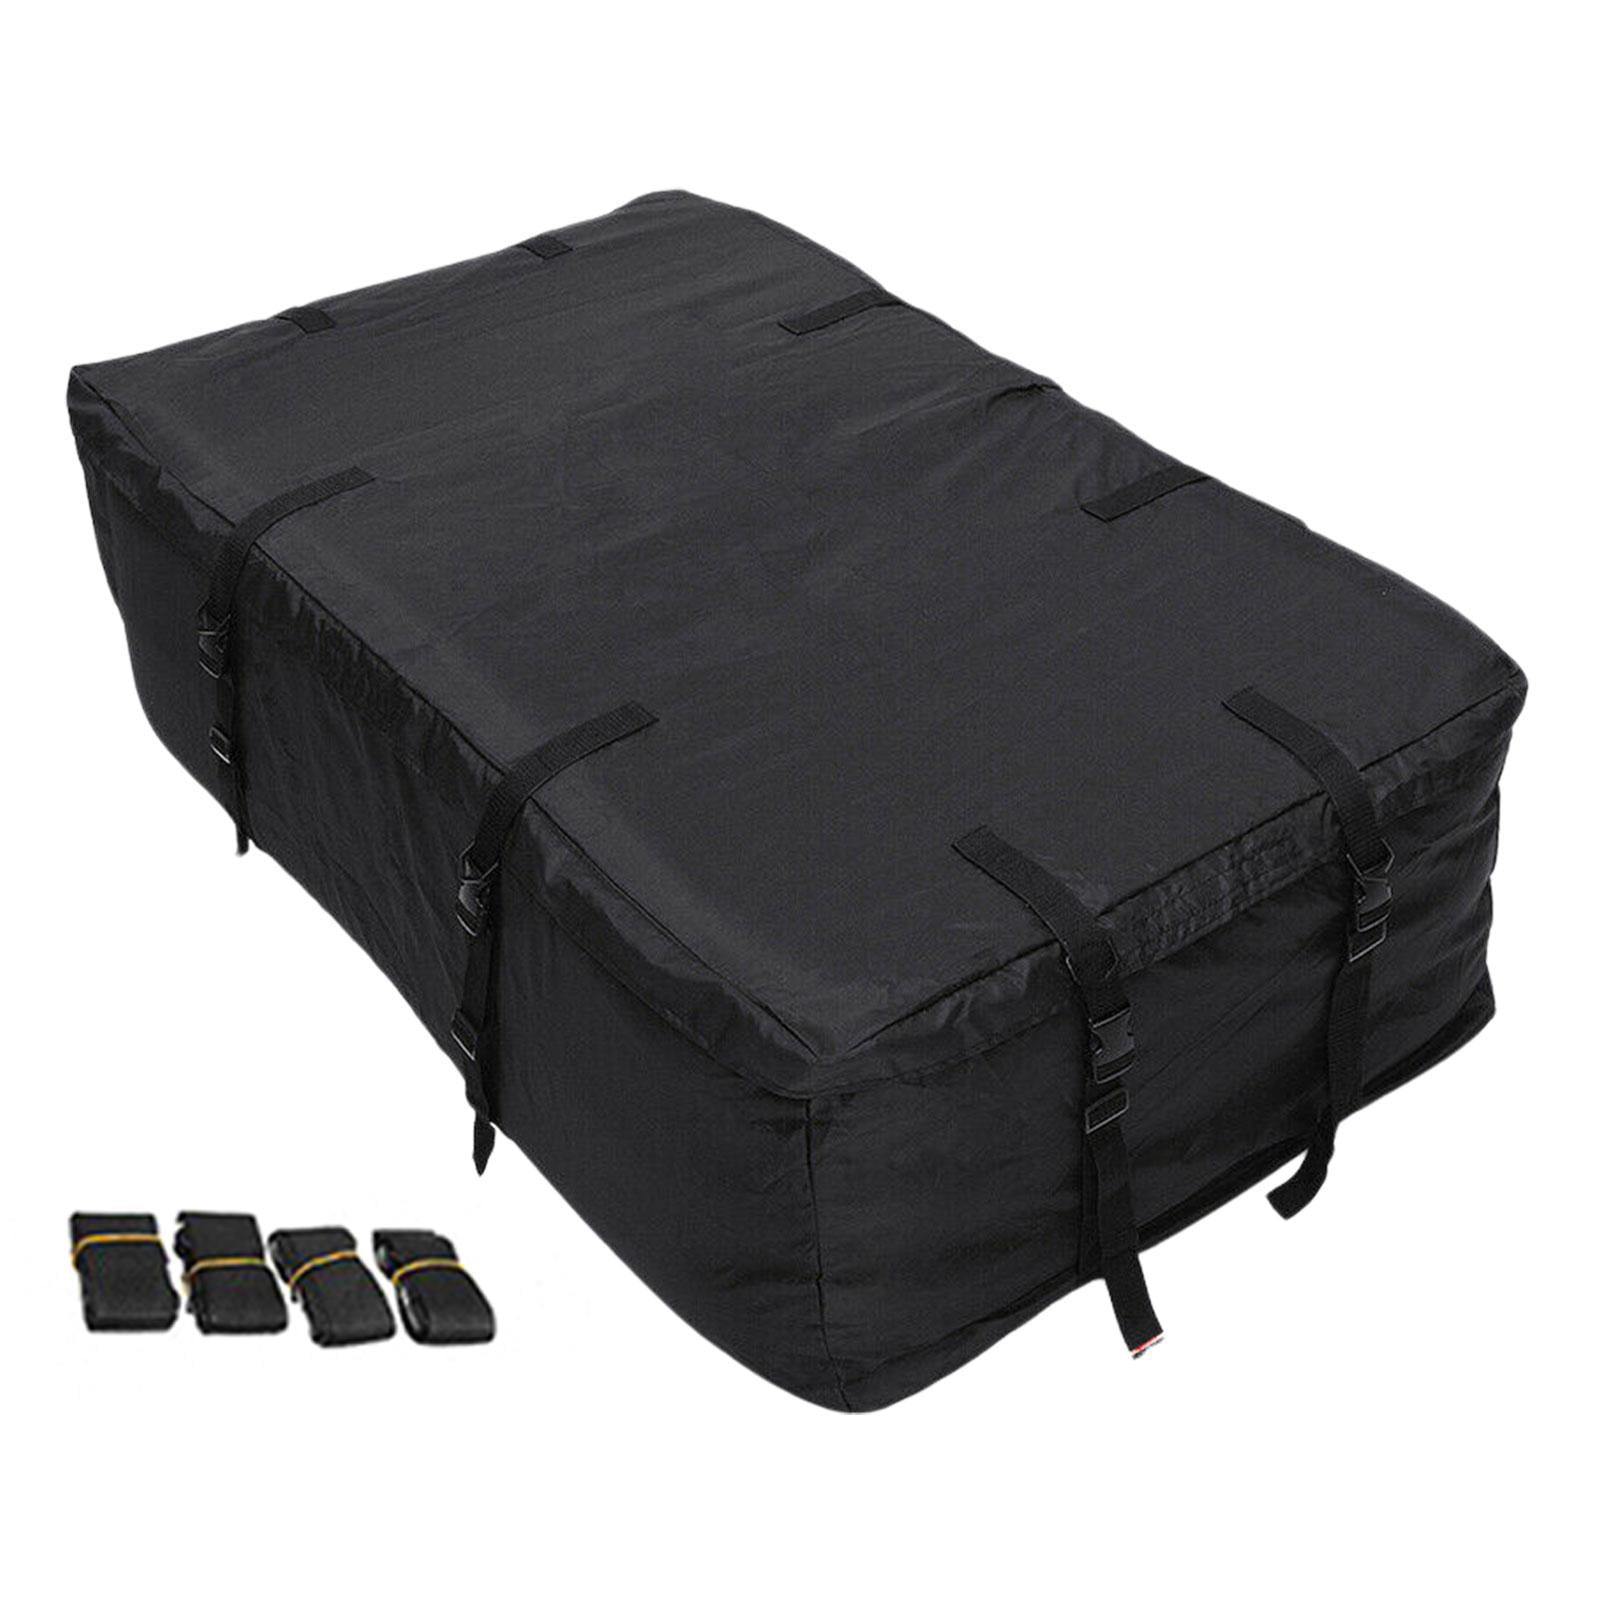 Mockins 25 Cubic Ft Waterproof Cargo Carrier Bag 59.5 x 23.5x 30.5 The Hitch Rack Cargo Bag is Made of Heavy Duty Abrasion Resistant Vinyl Strong Enough to Endure High Intensity Weather Conditions…